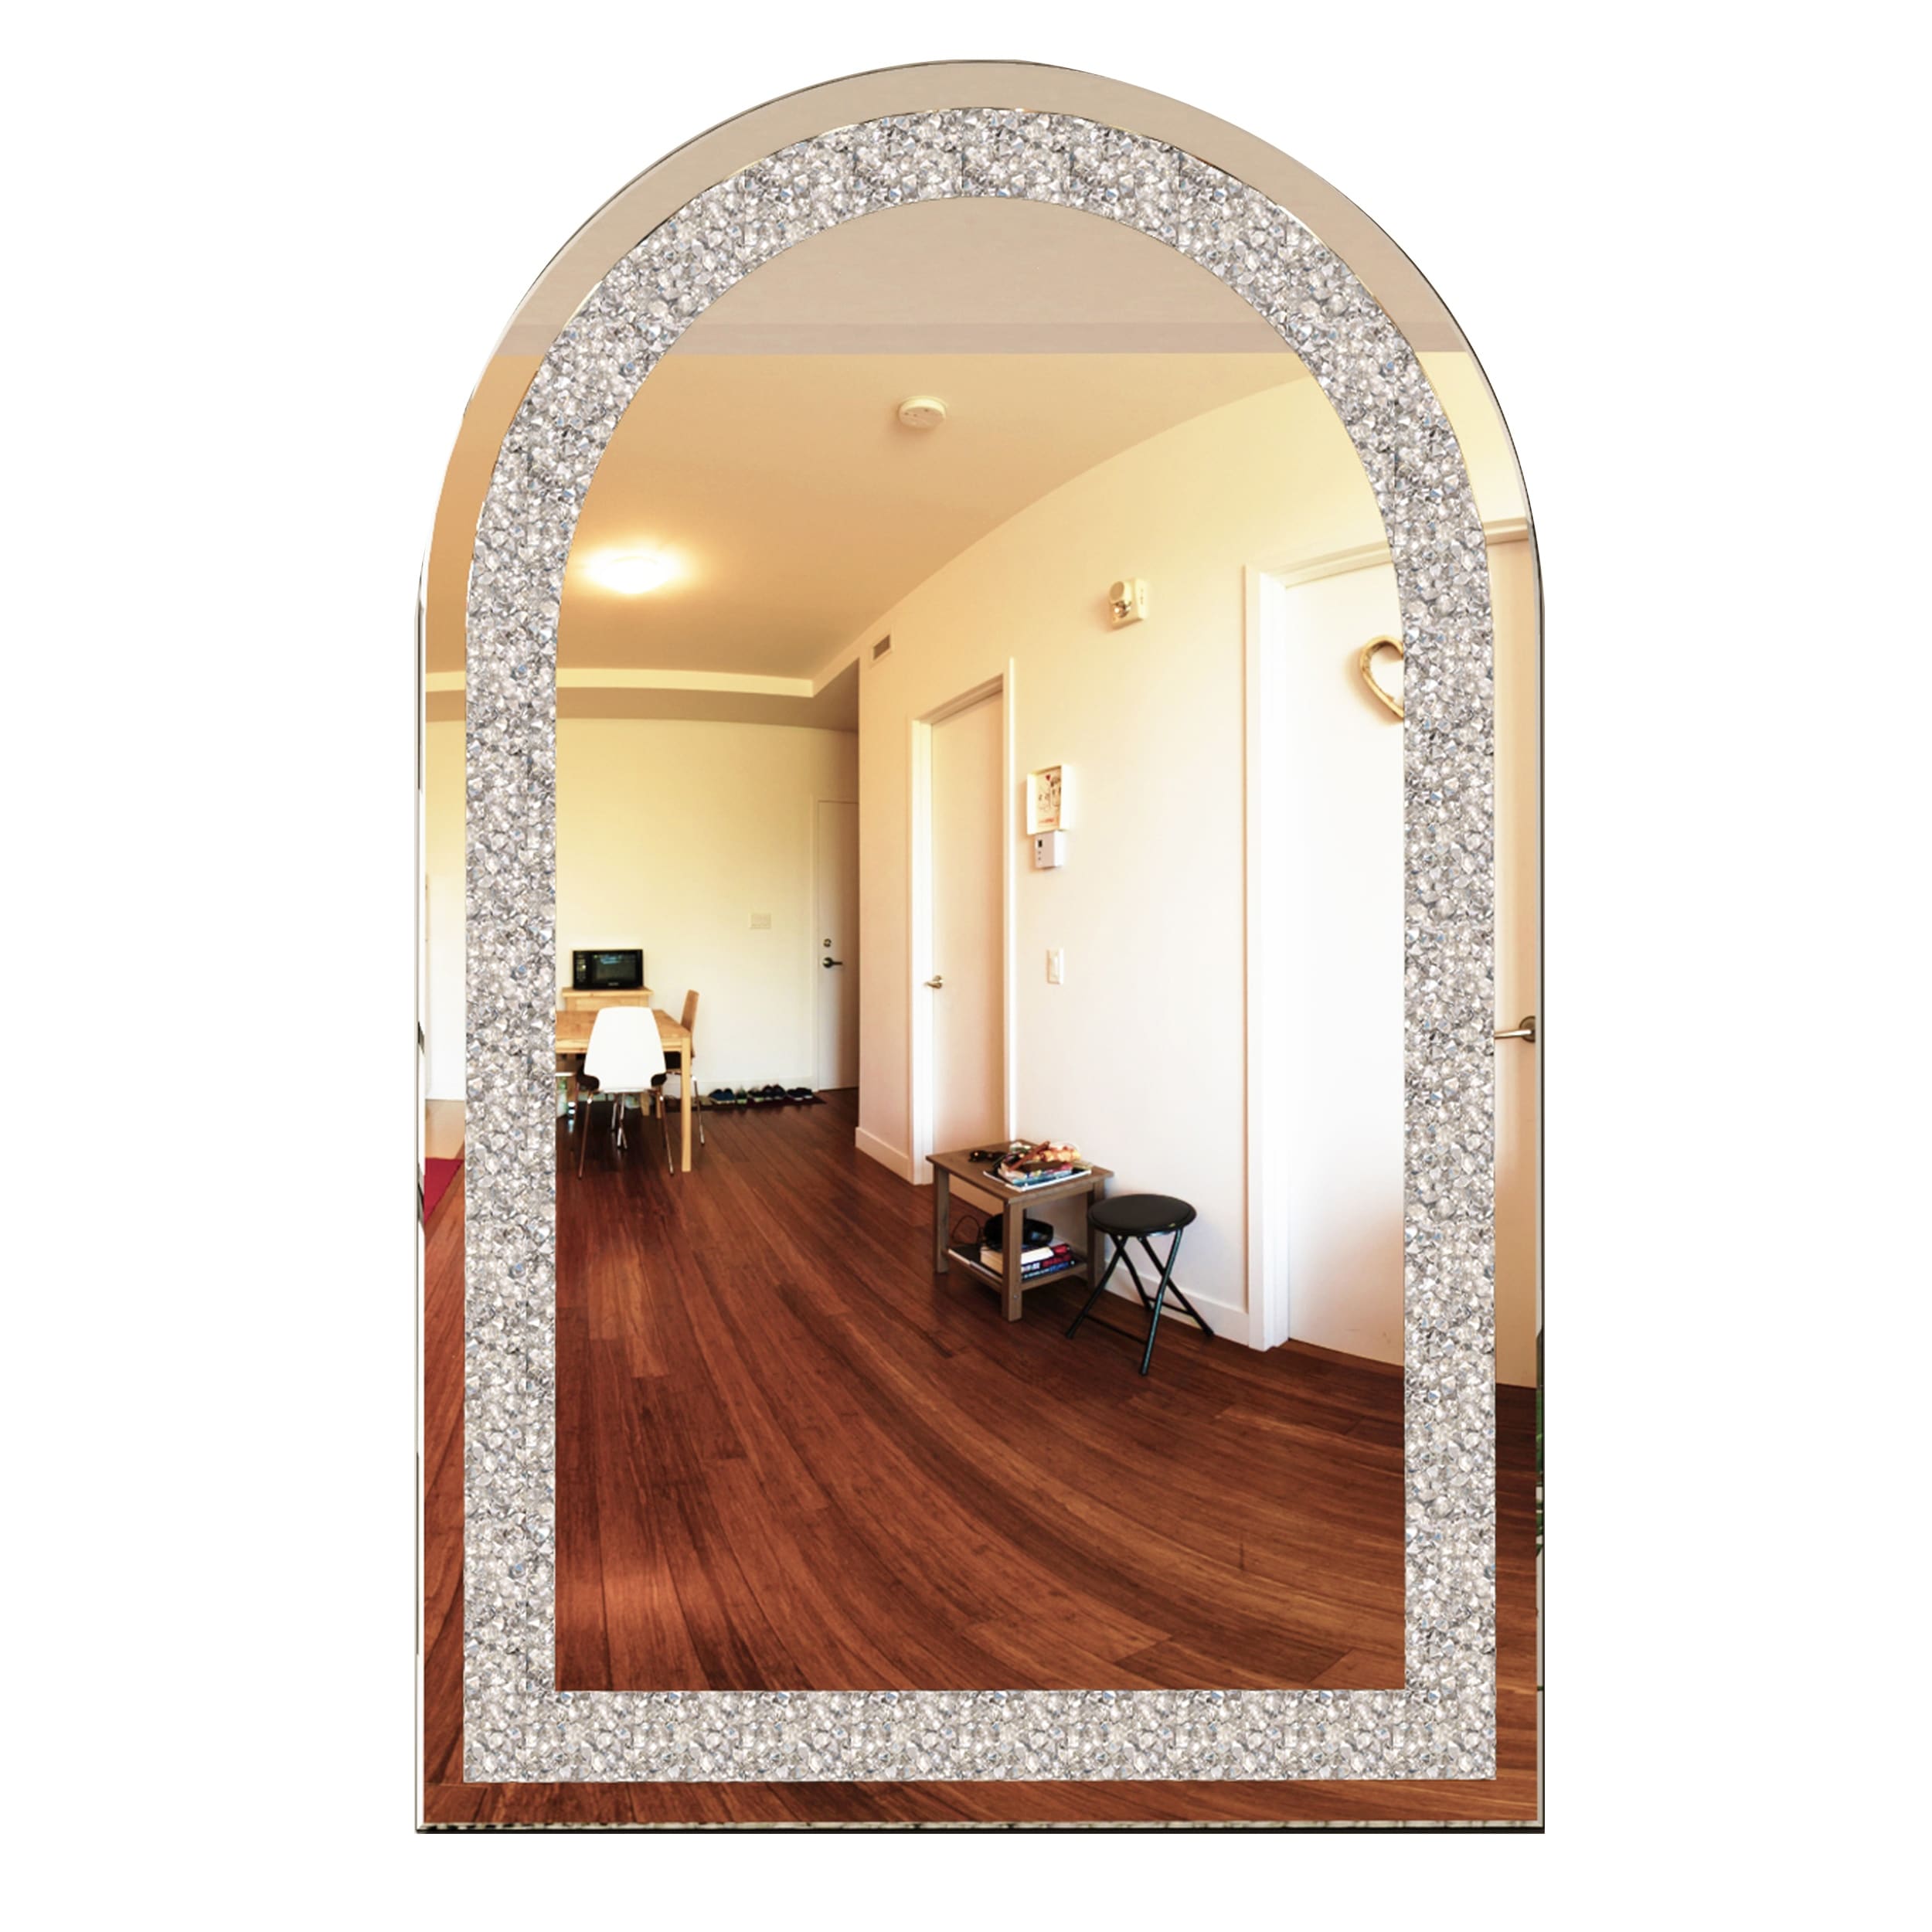 Sparkling Crystal Crush Diamond Arch Accent Mirror Wall Mounted - 23.6" W x 35.4" H